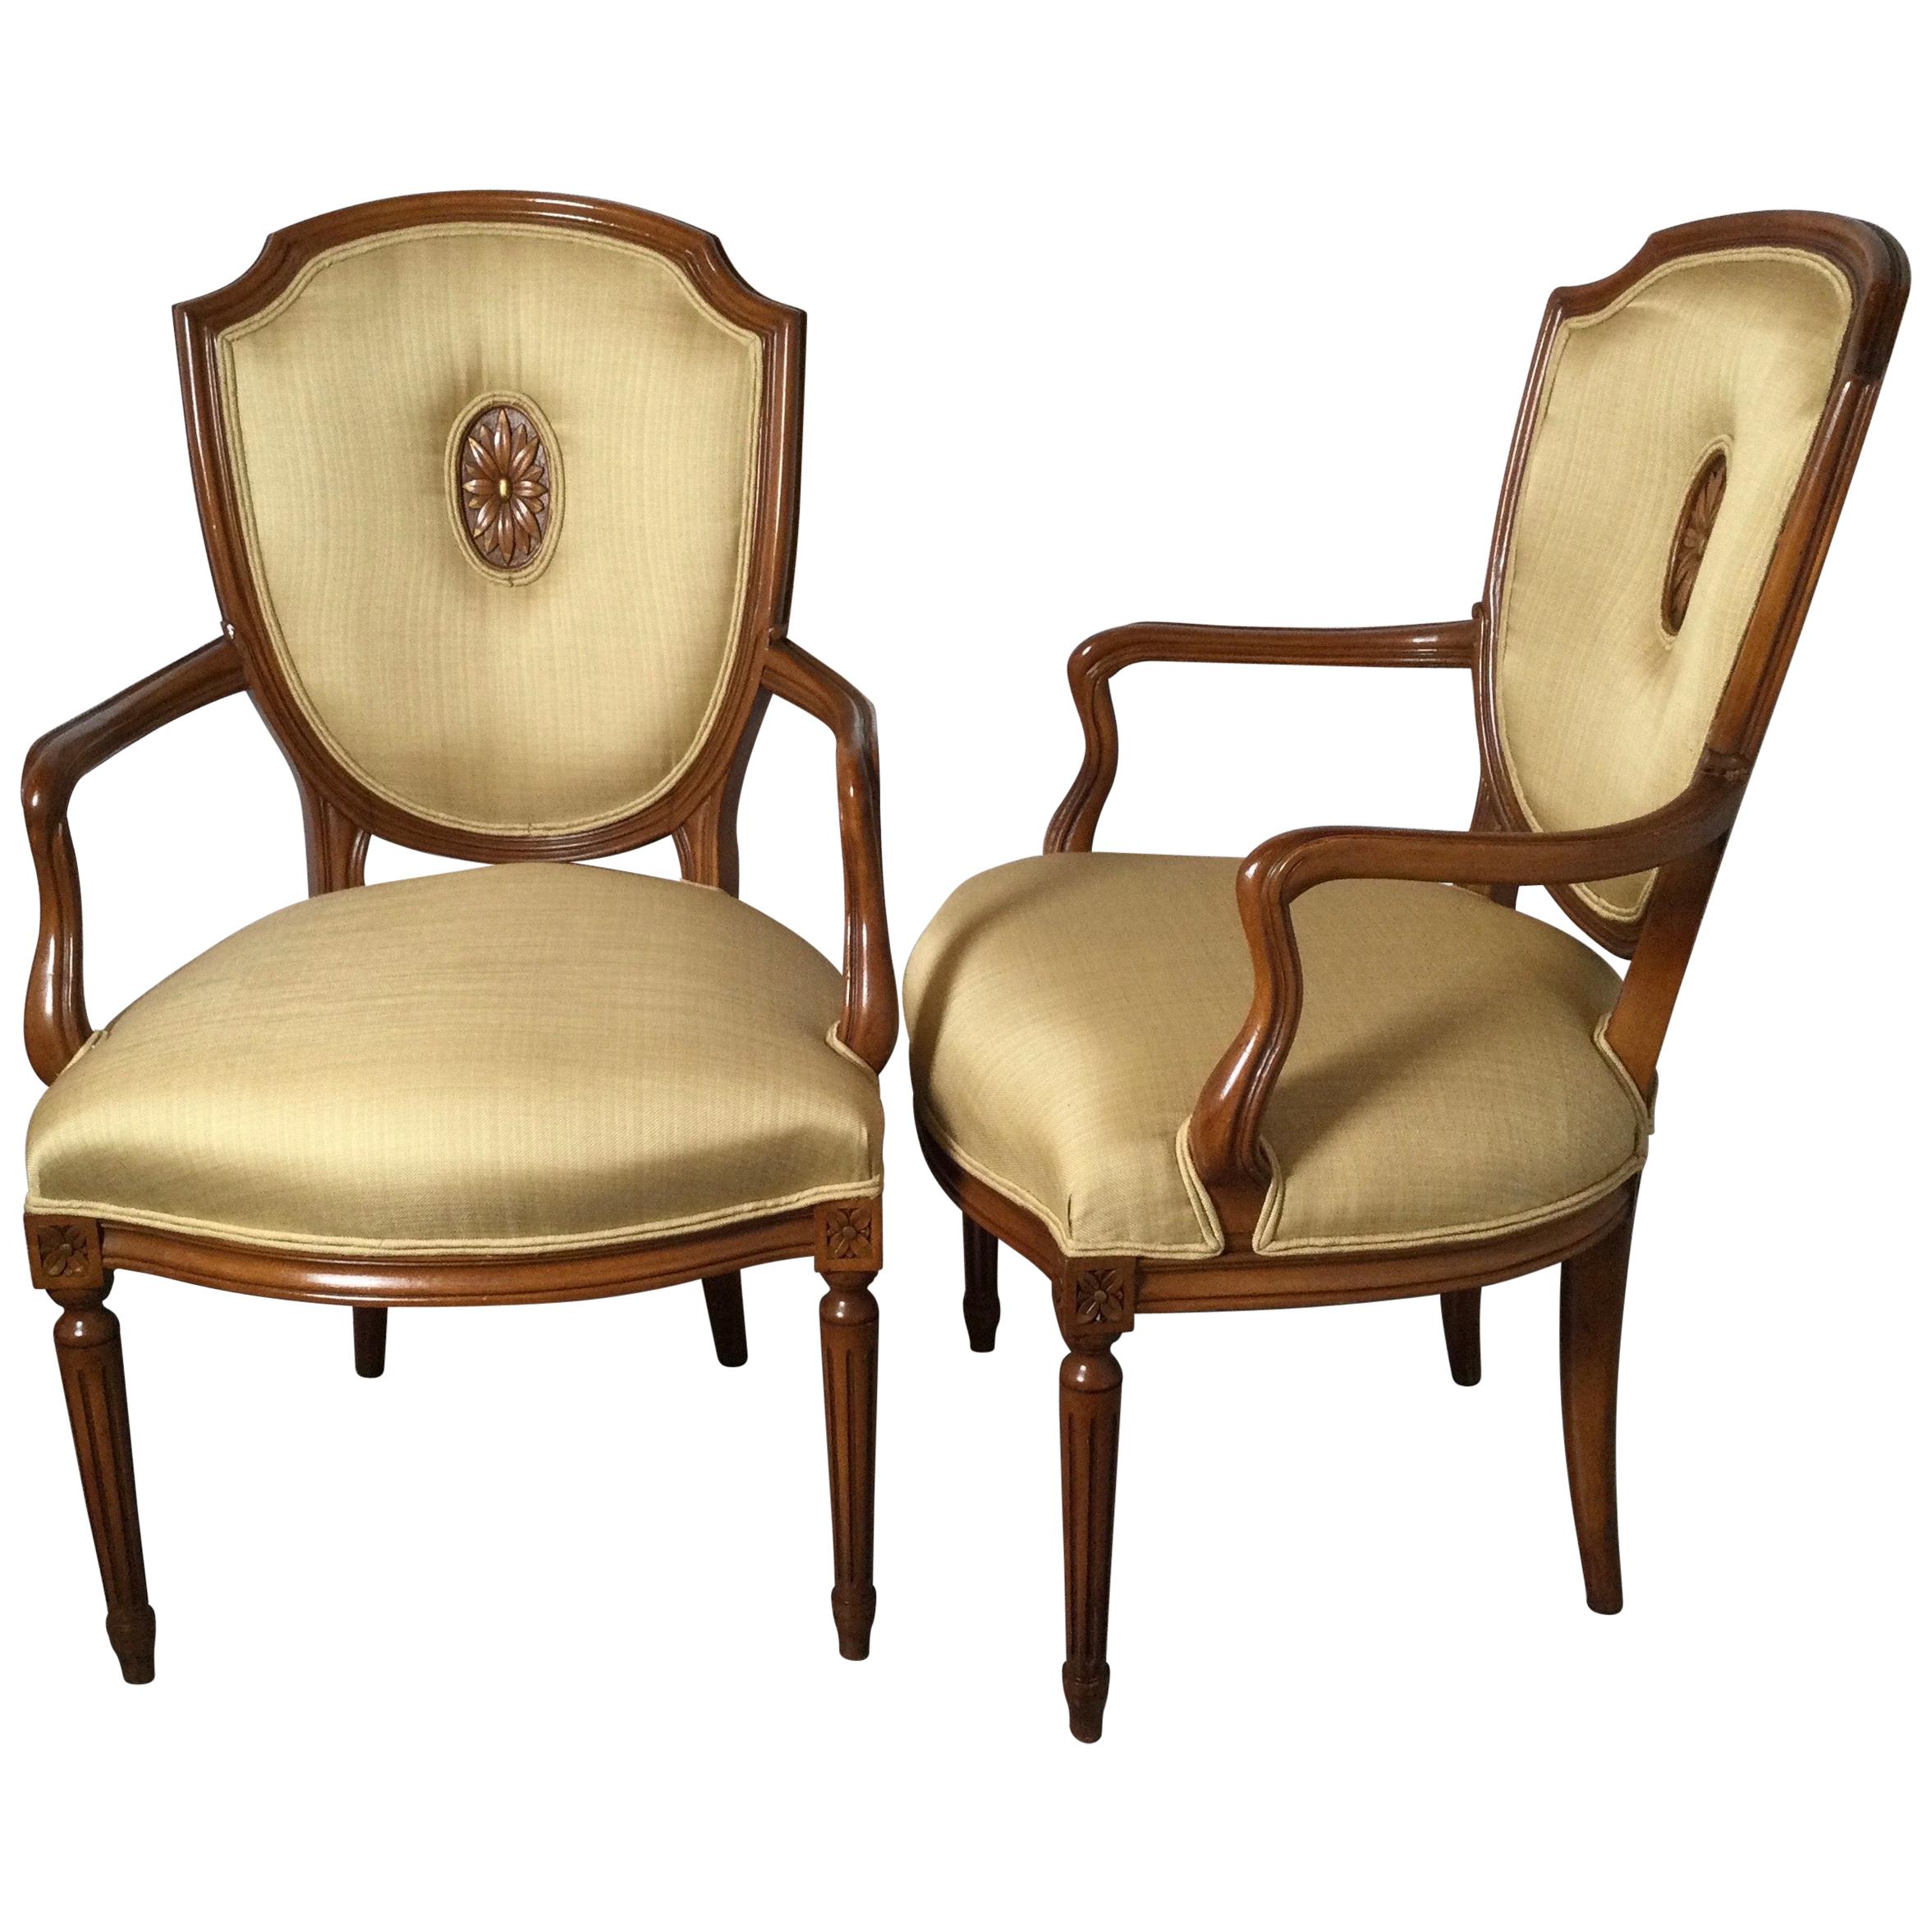 Pair of Fruitwood Shield Back Armchairs in Linen